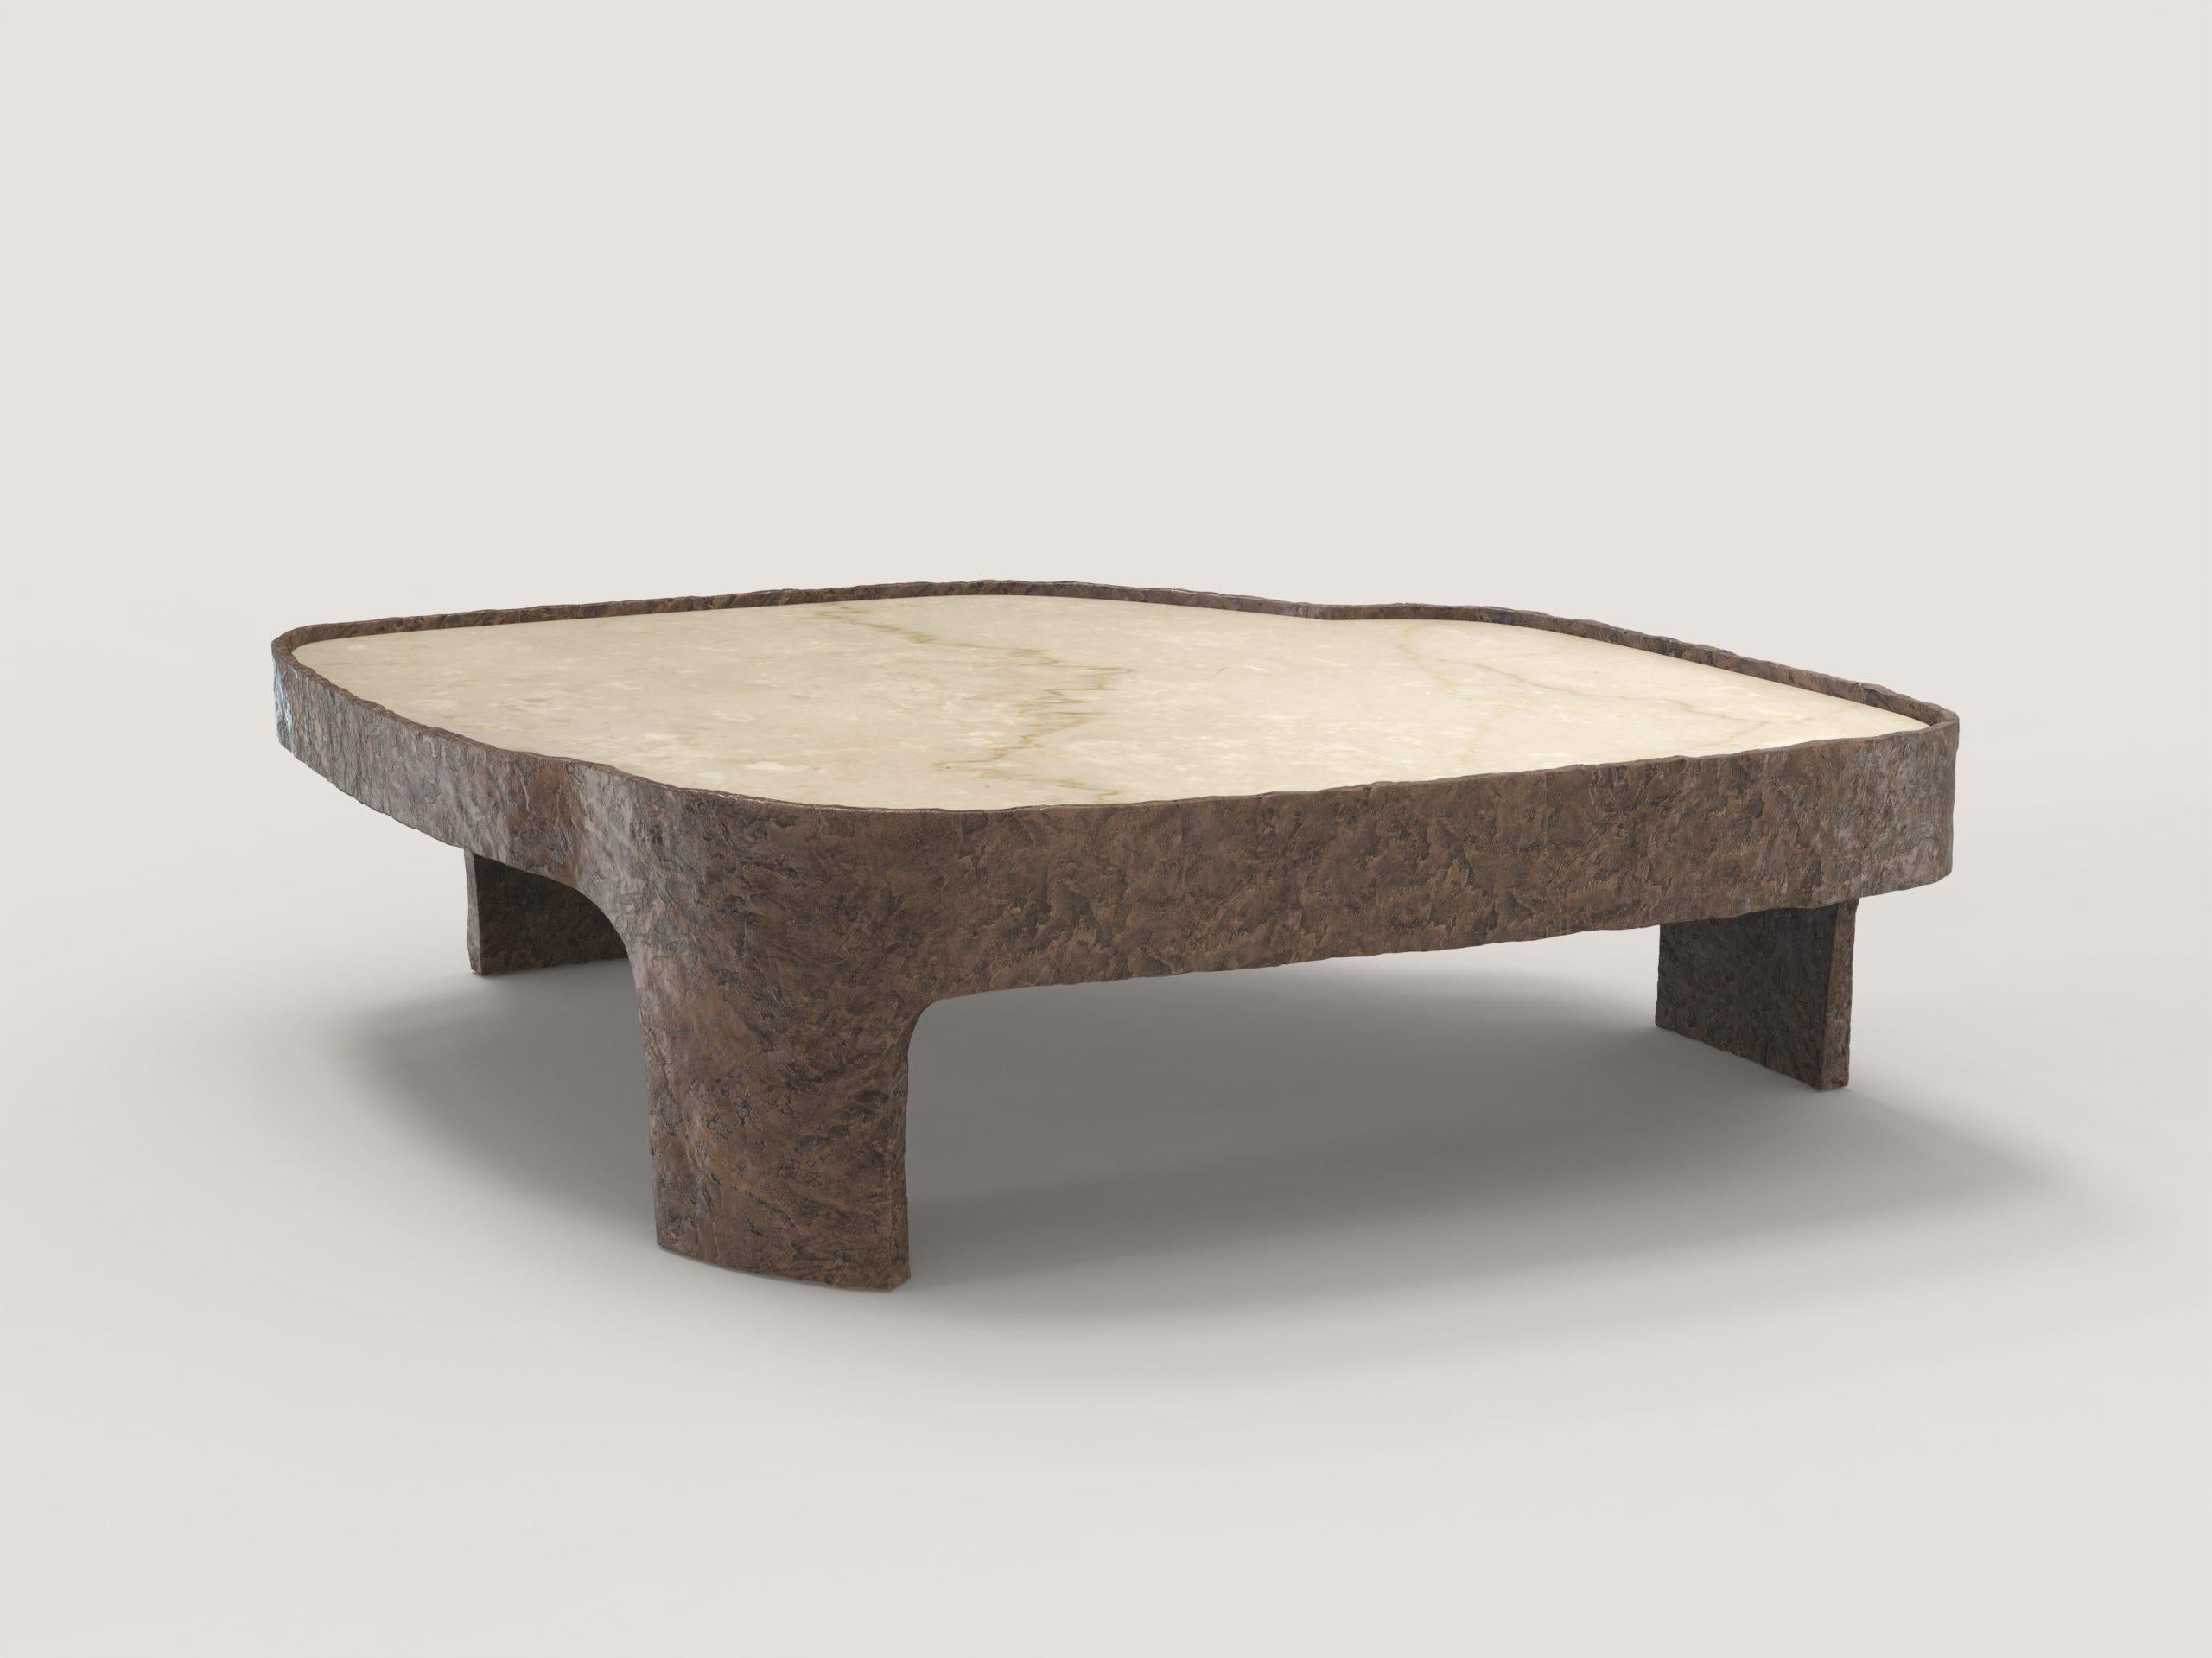 Sumatra bronze V2 low table by Edizione Limitata
Limited Edition of 15 + 3 pieces. Signed and numbered.
Dimensions: D 100 x W 100 x H 30 cm.
Materials: Cast bronze and botticino marble.

Sumatra is a 21st Century collection of tables made by